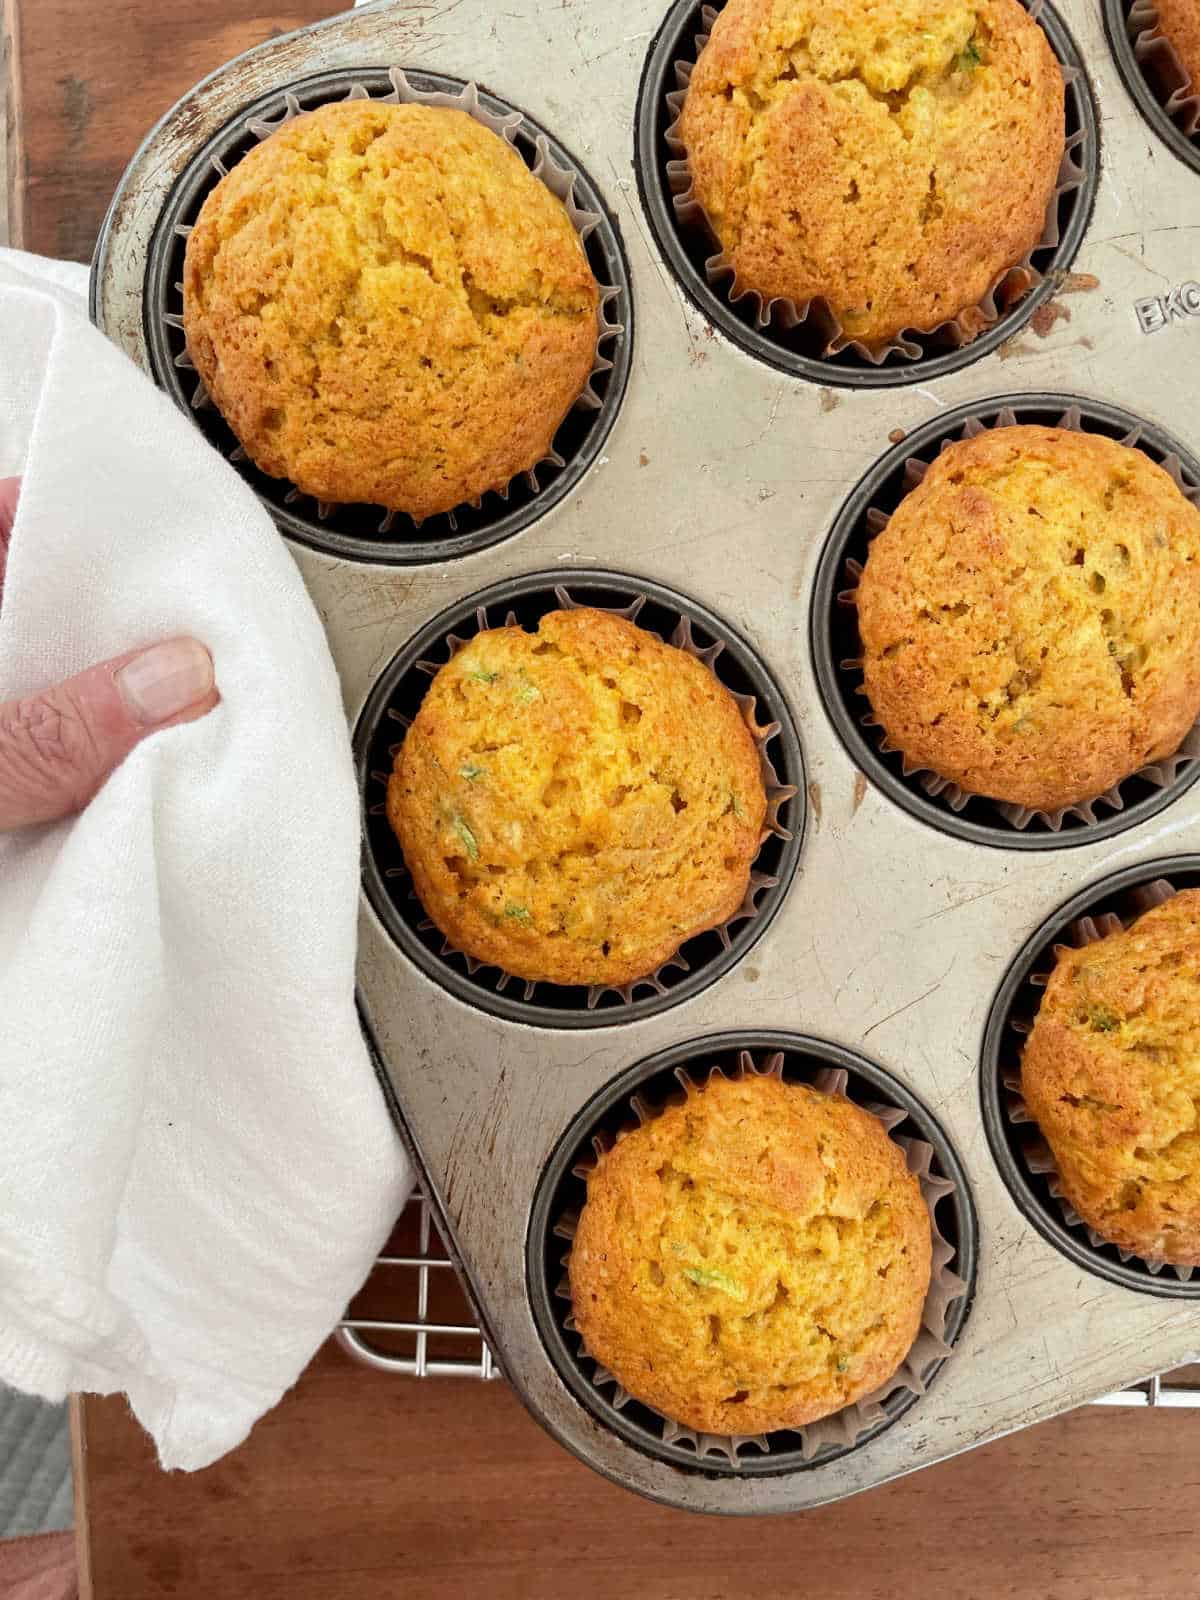 Hand holding baked pumpkin zucchini muffins in a metal pan on a wooden surface with a white kitchen towel.